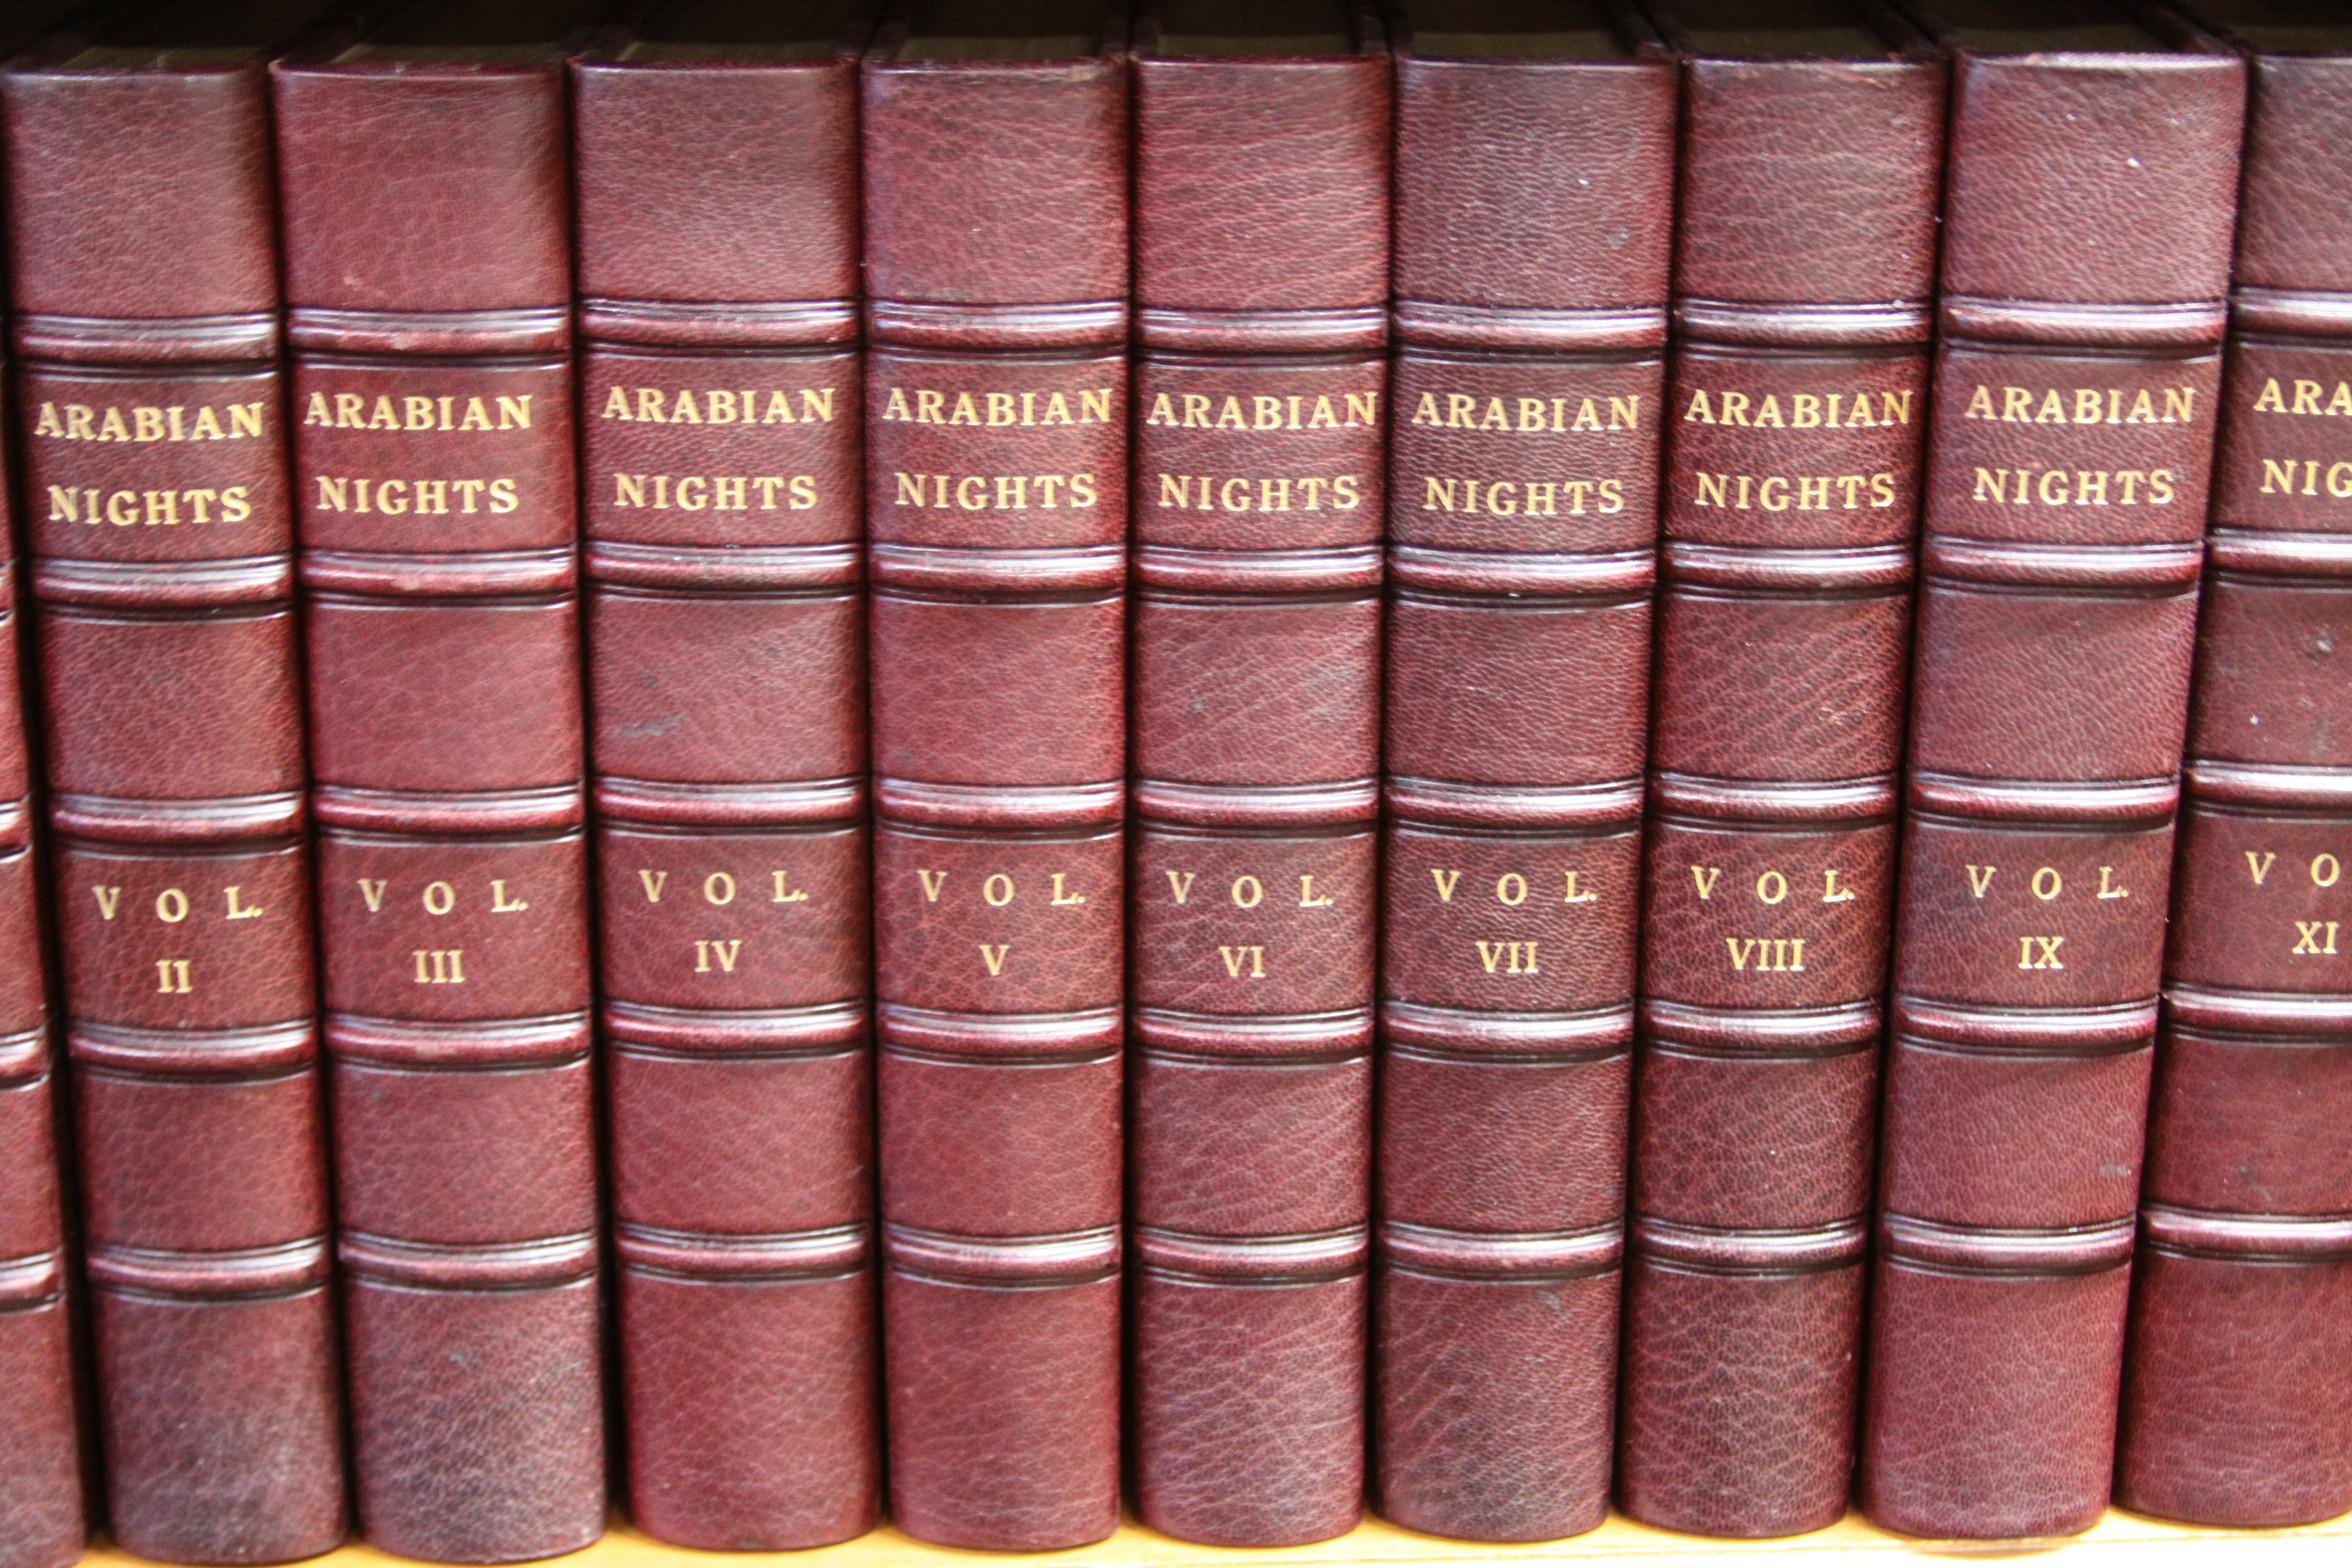 Twelve volumes. Thick octavo. Arabian Nights by Richard Francis Burton. Published Benares Kamashastra Society 1885. Printed for private subscribers only. Profusely illustrated. (This edition is a reprint of the First Edition).
Bound in three